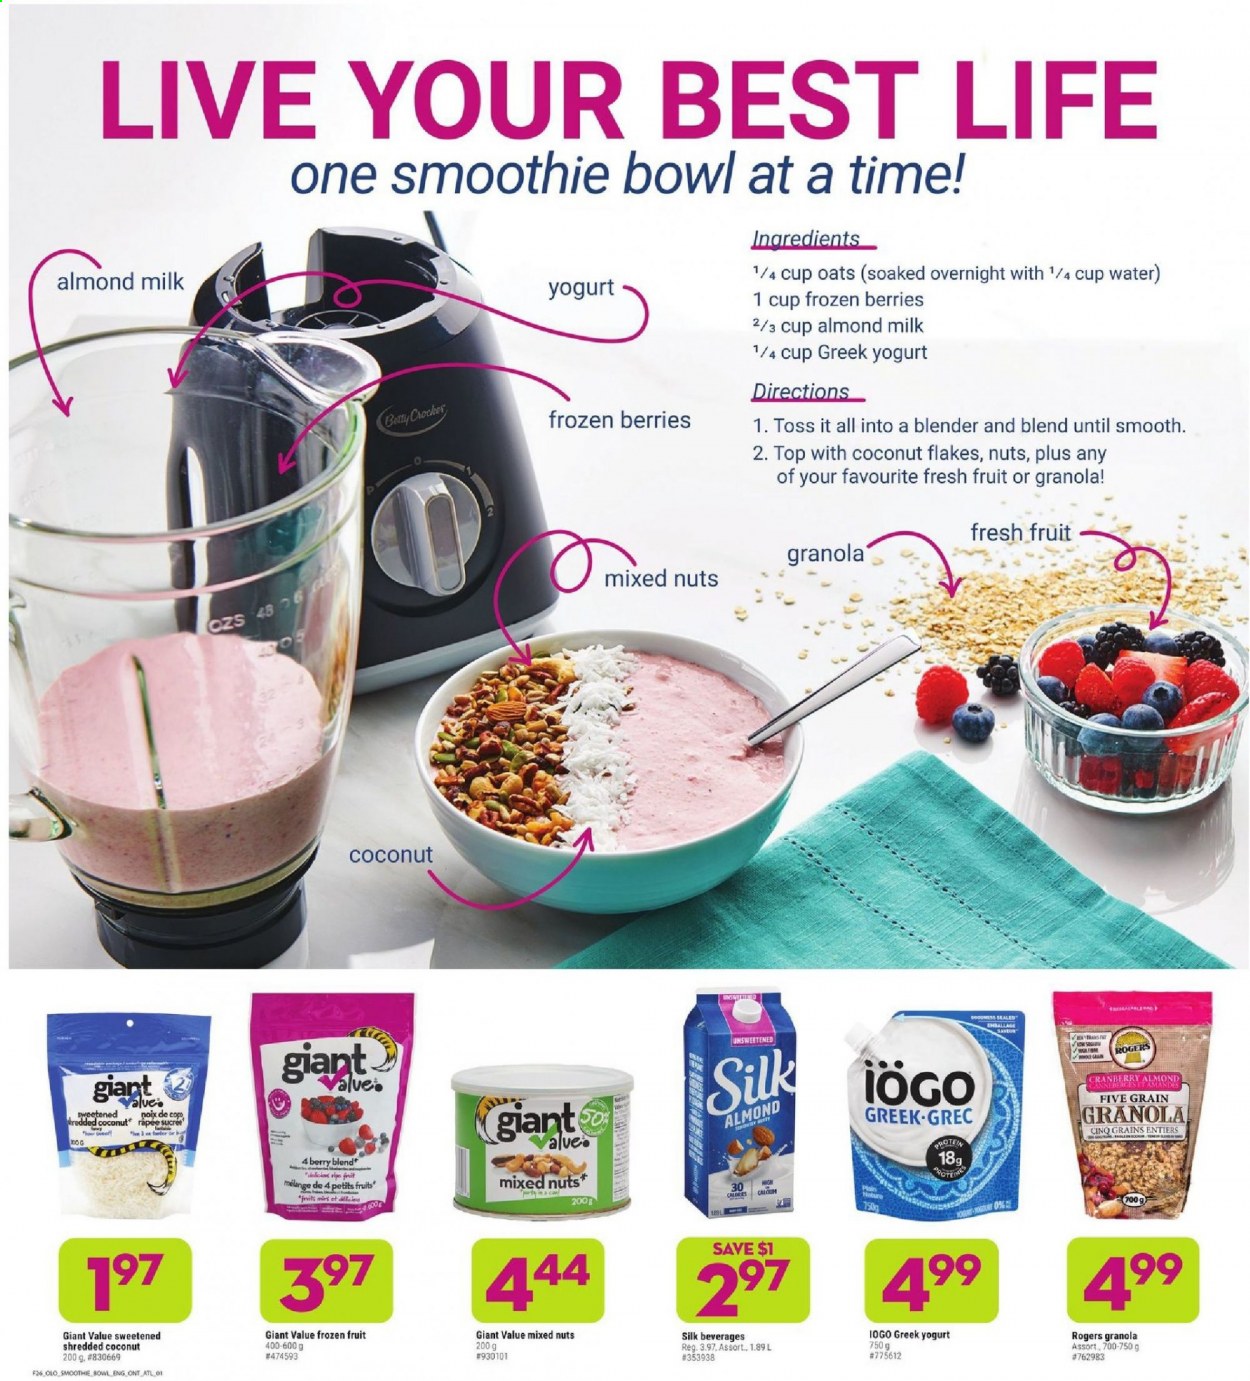 thumbnail - Giant Tiger Flyer - January 27, 2021 - February 02, 2021 - Sales products - almond milk, Silk, frozen berries, oats, flaked coconut, mixed nuts, shredded coconut, granola. Page 3.